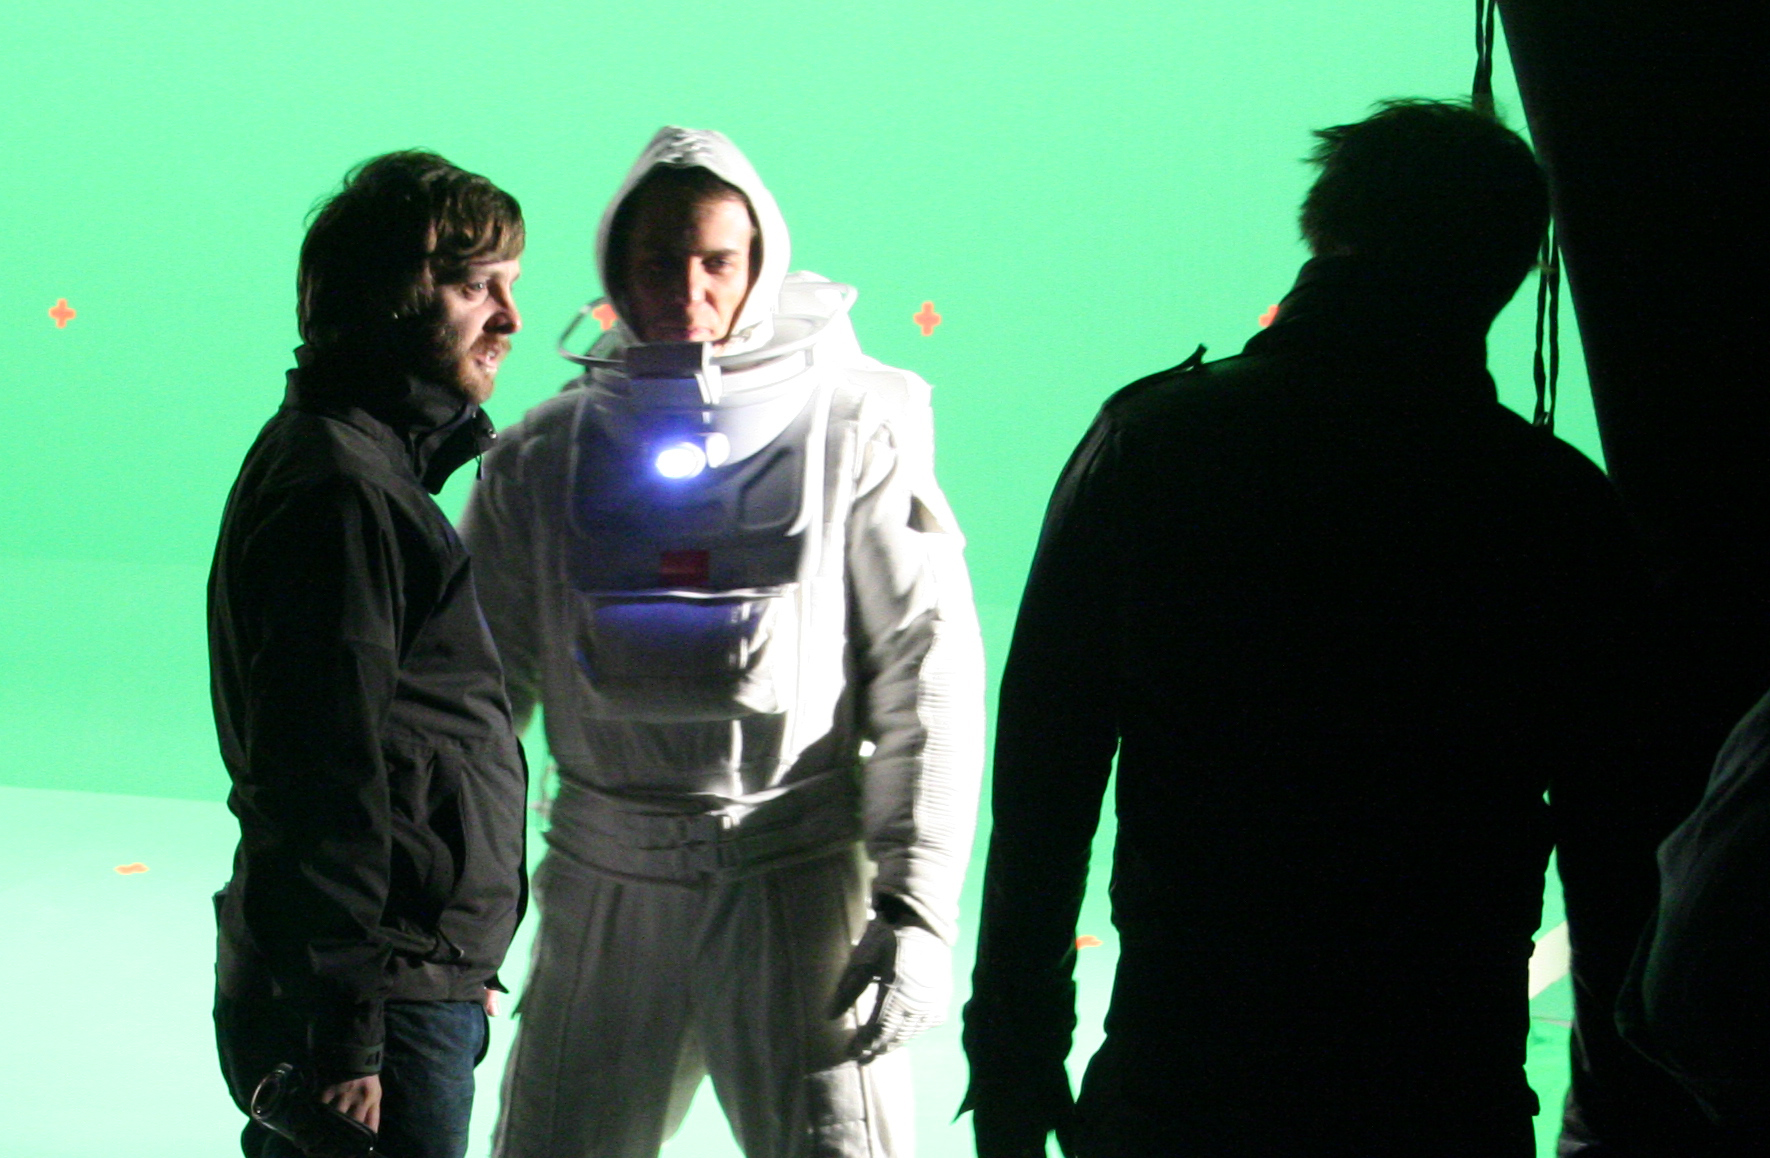 Setting up the final green-screen shot with Sam Rockwell during the studio shoot for 